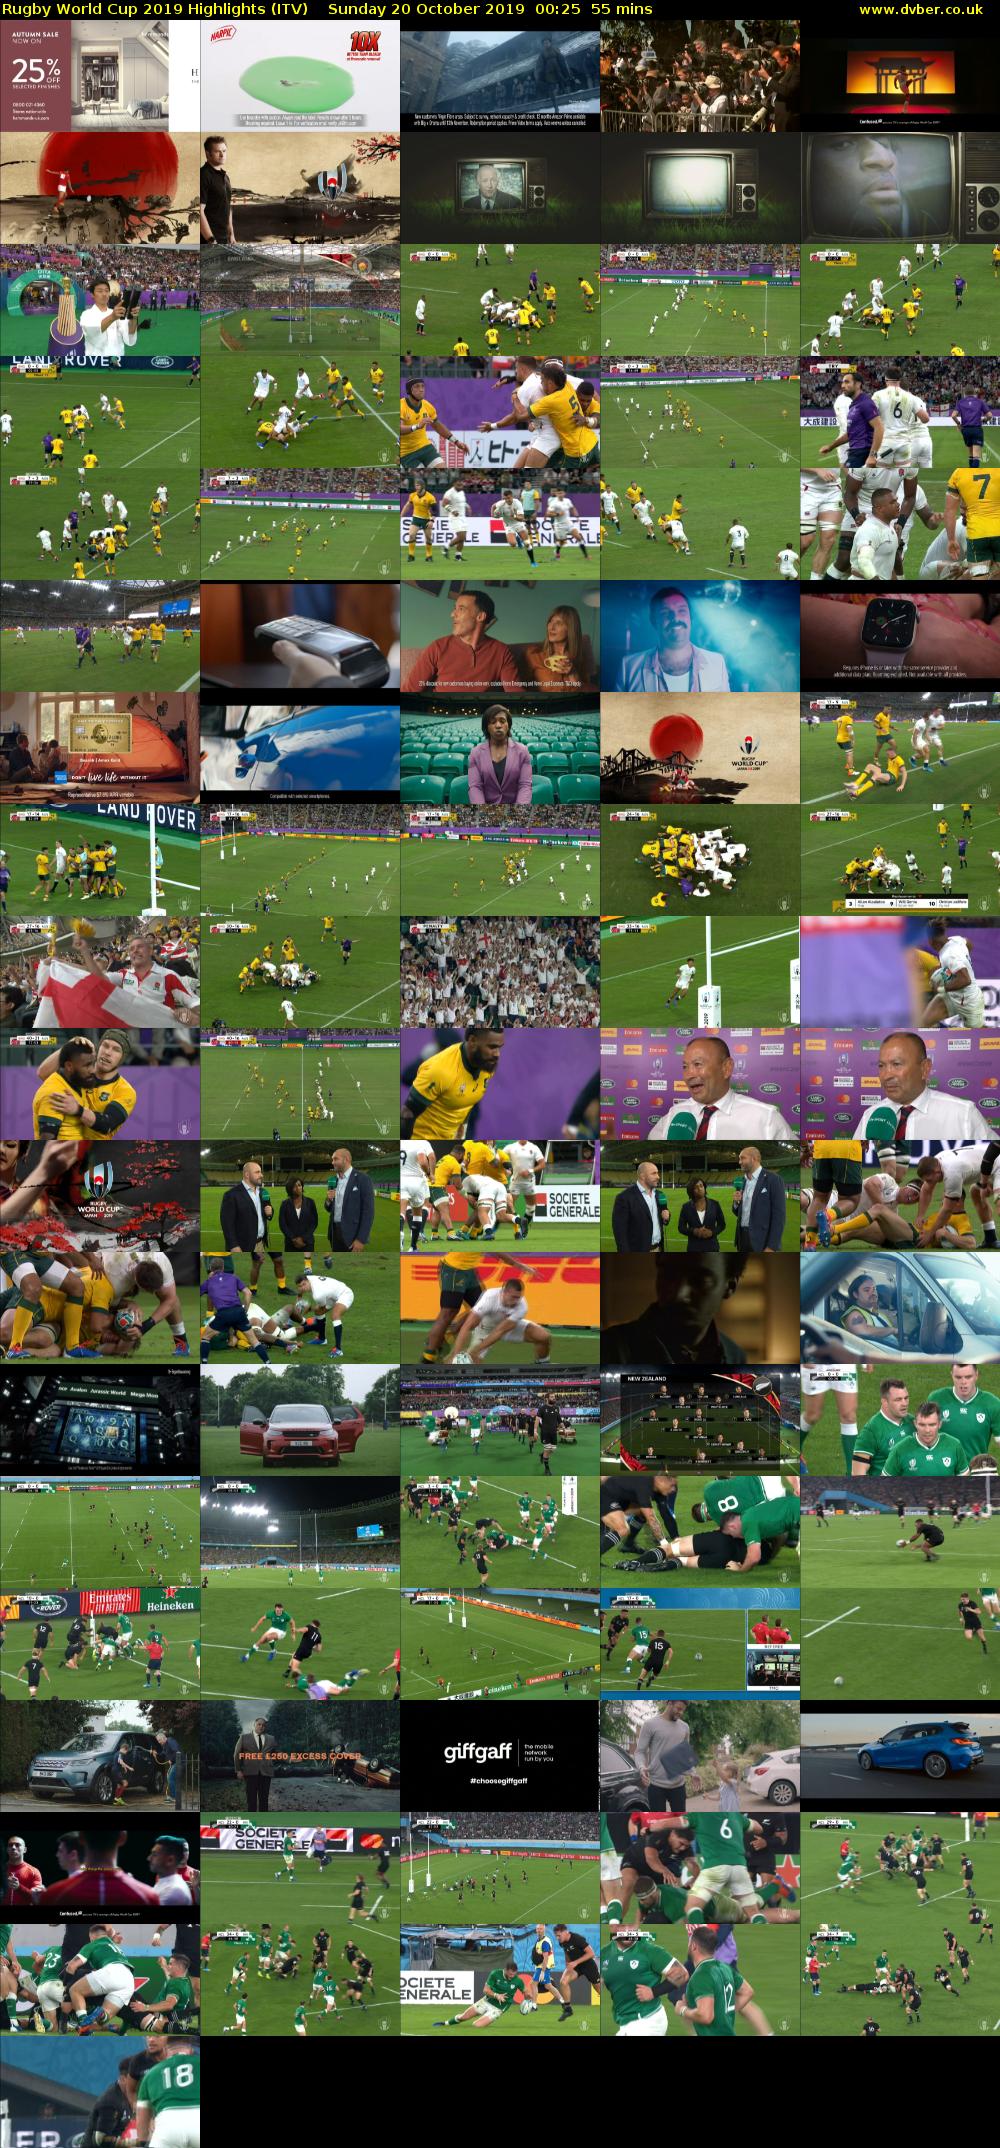 Rugby World Cup 2019 Highlights (ITV) Sunday 20 October 2019 00:25 - 01:20